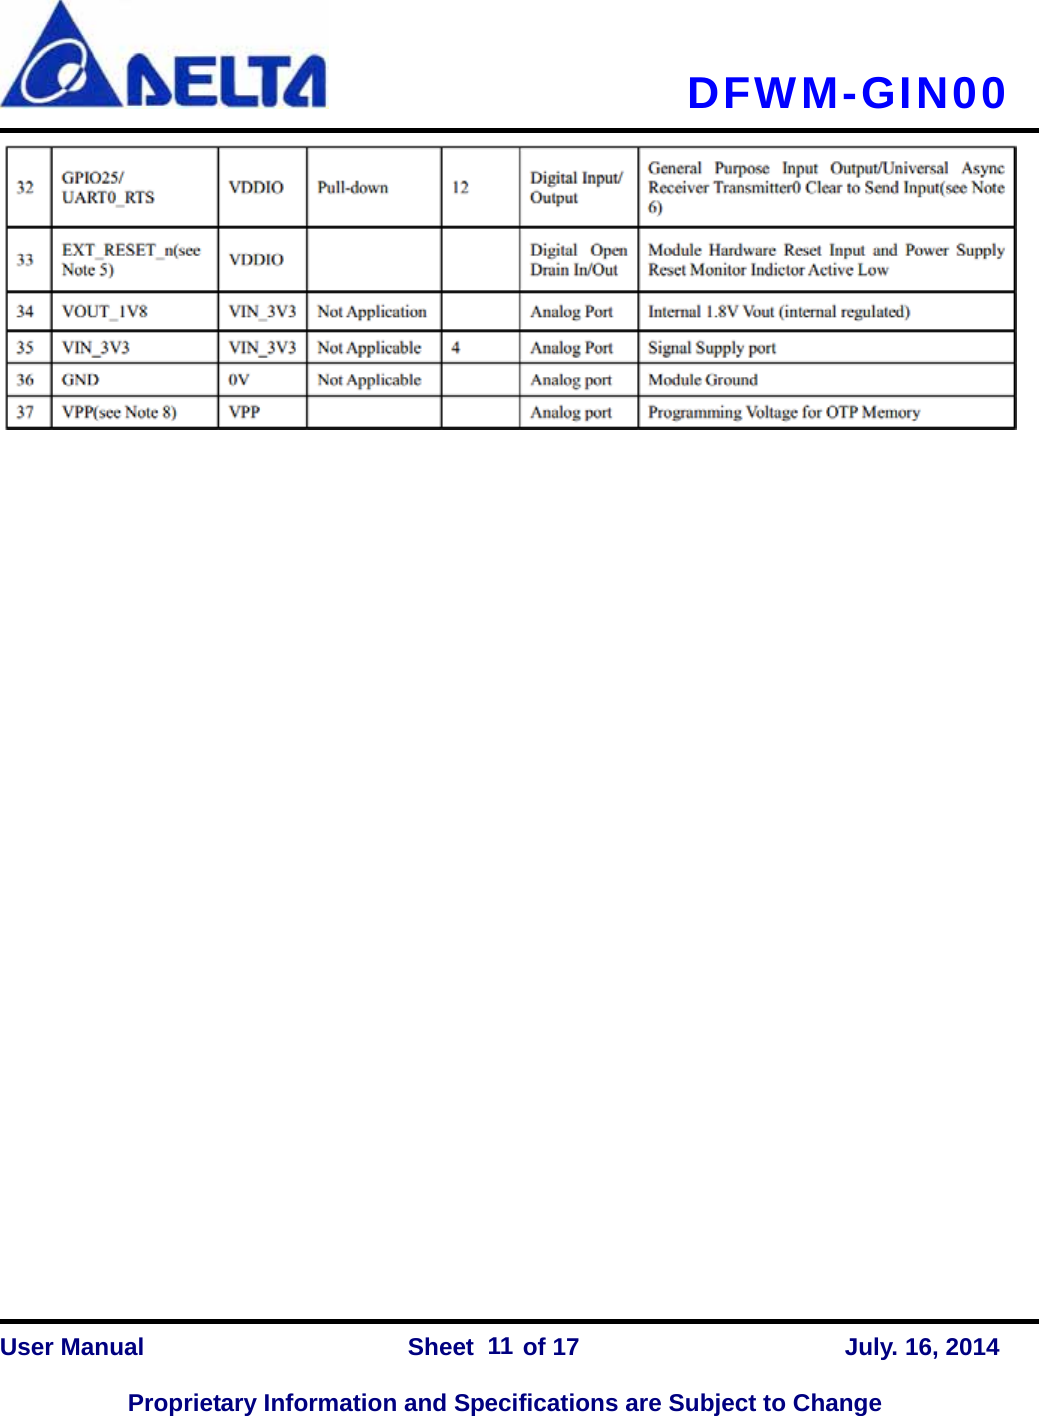   DFWM-GIN00    User Manual                Sheet    of 17      July. 16, 2014  Proprietary Information and Specifications are Subject to Change 11                         